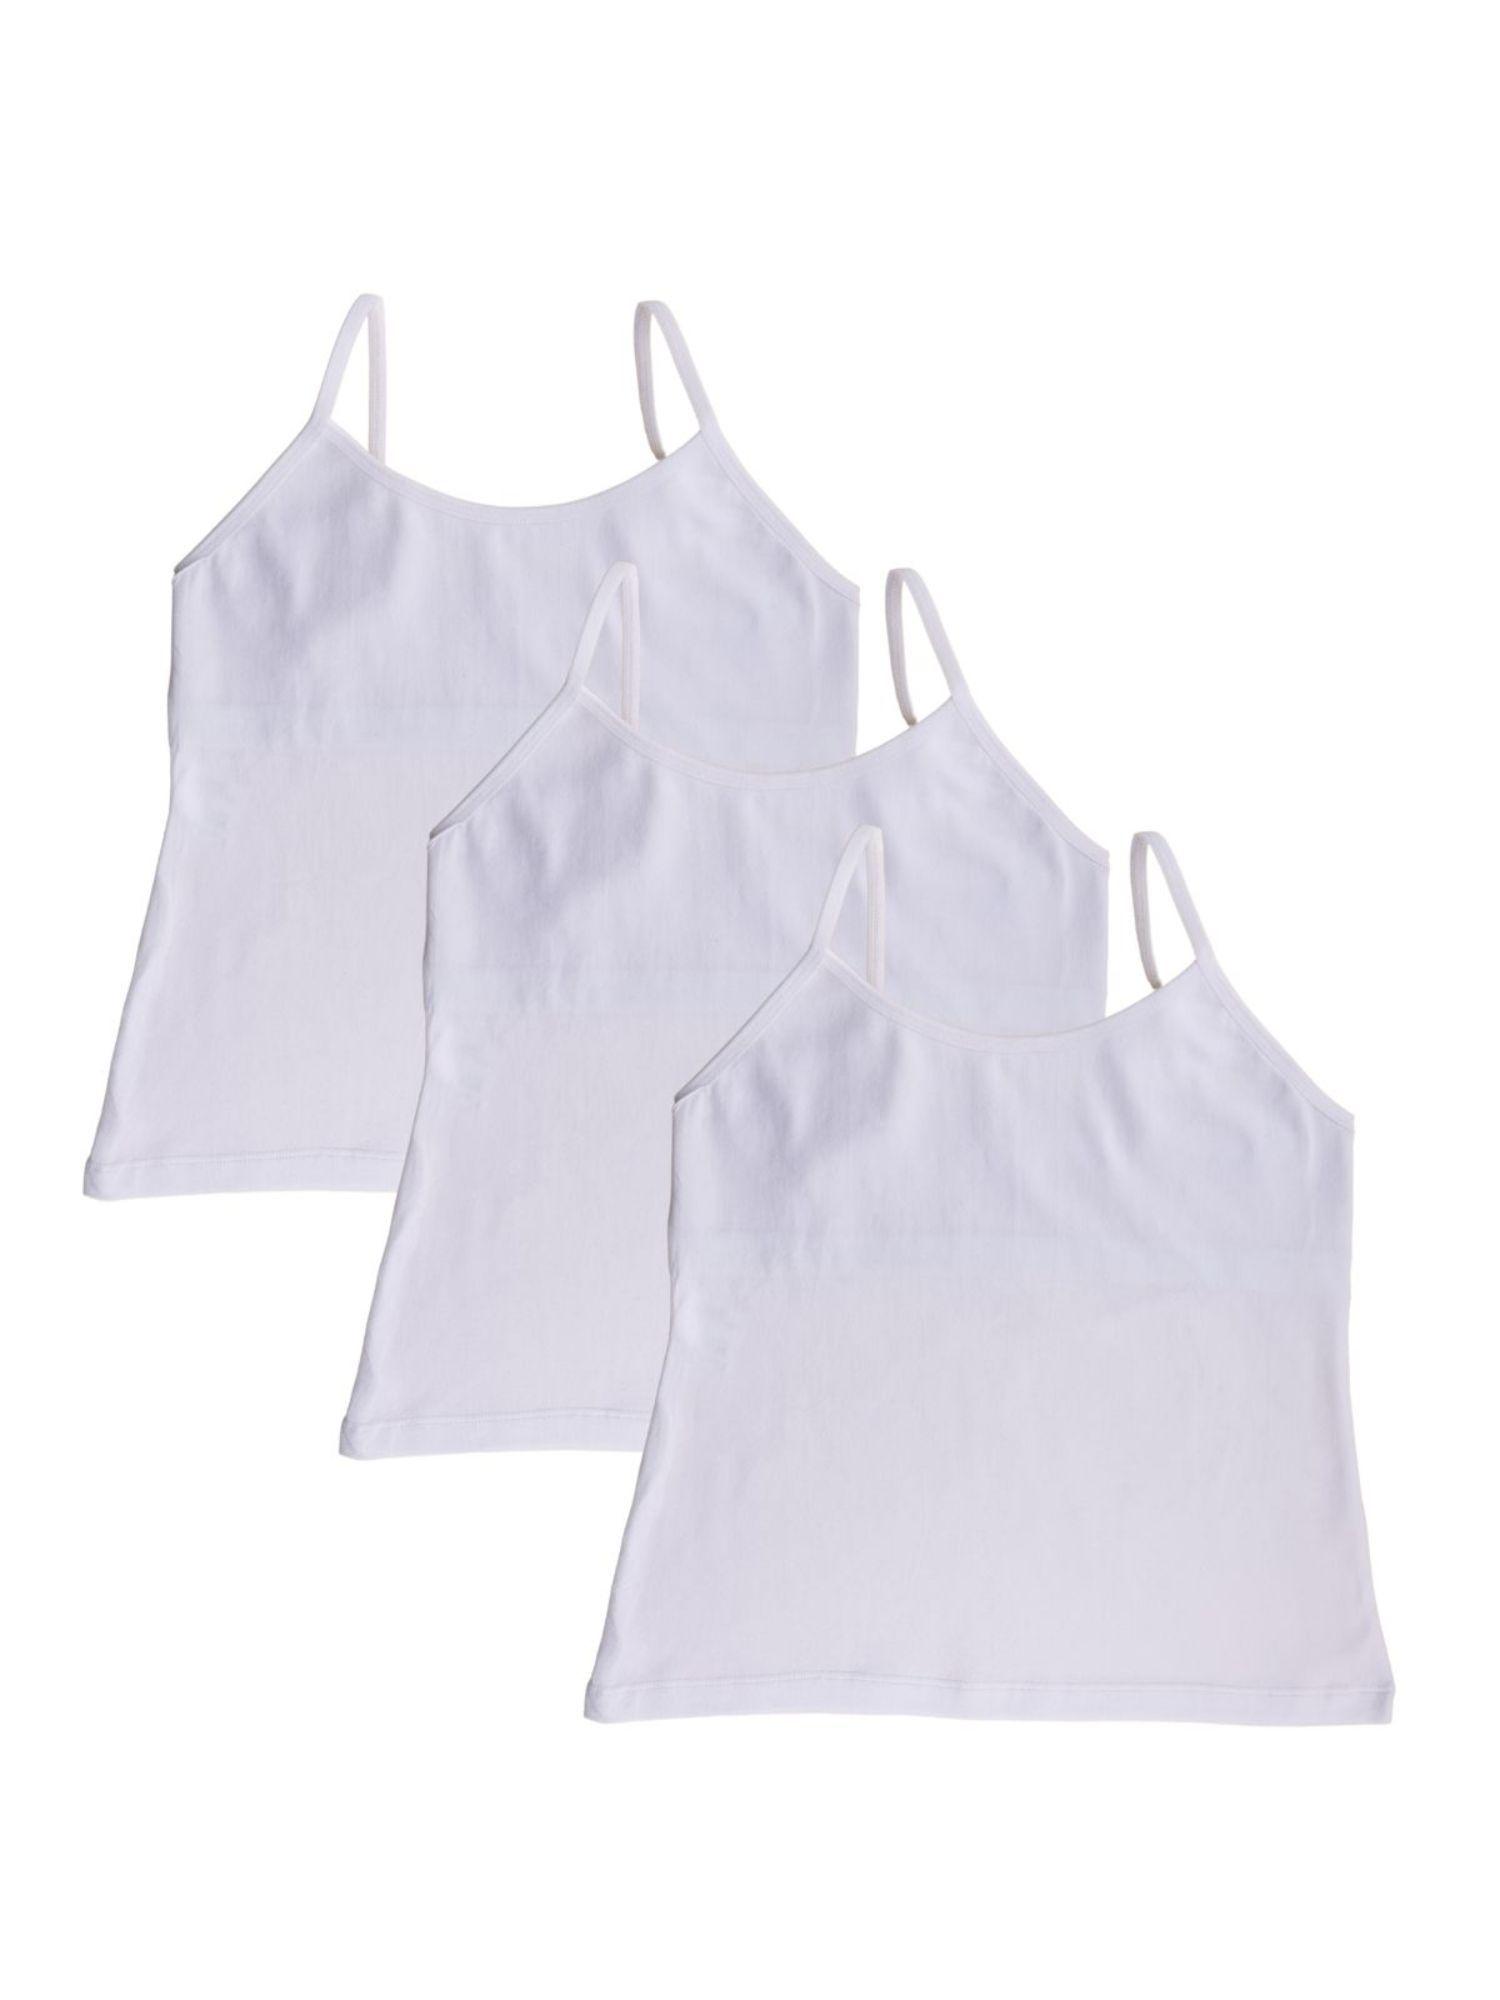 pack of 3 starter camisole - padded - white